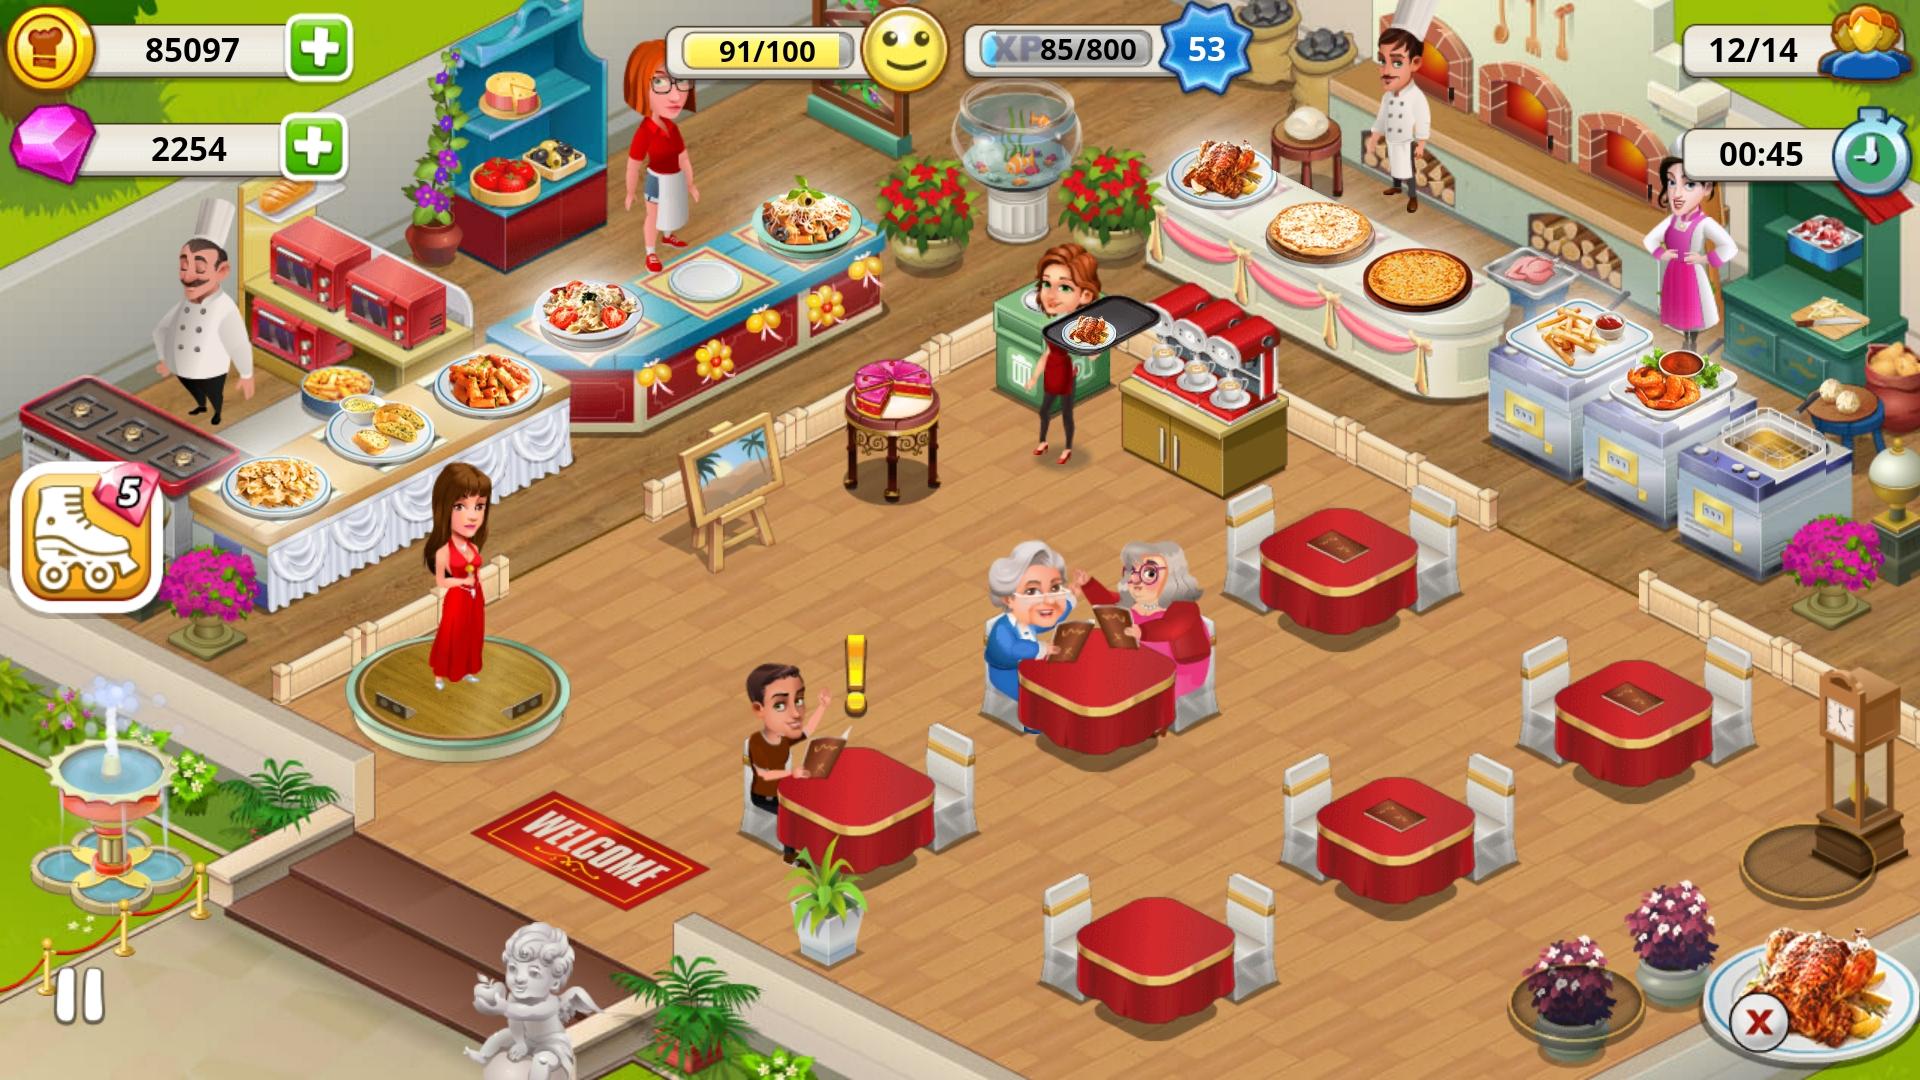 Cafe Tycoon Cooking & Restaurant Simulation game APK 4.6